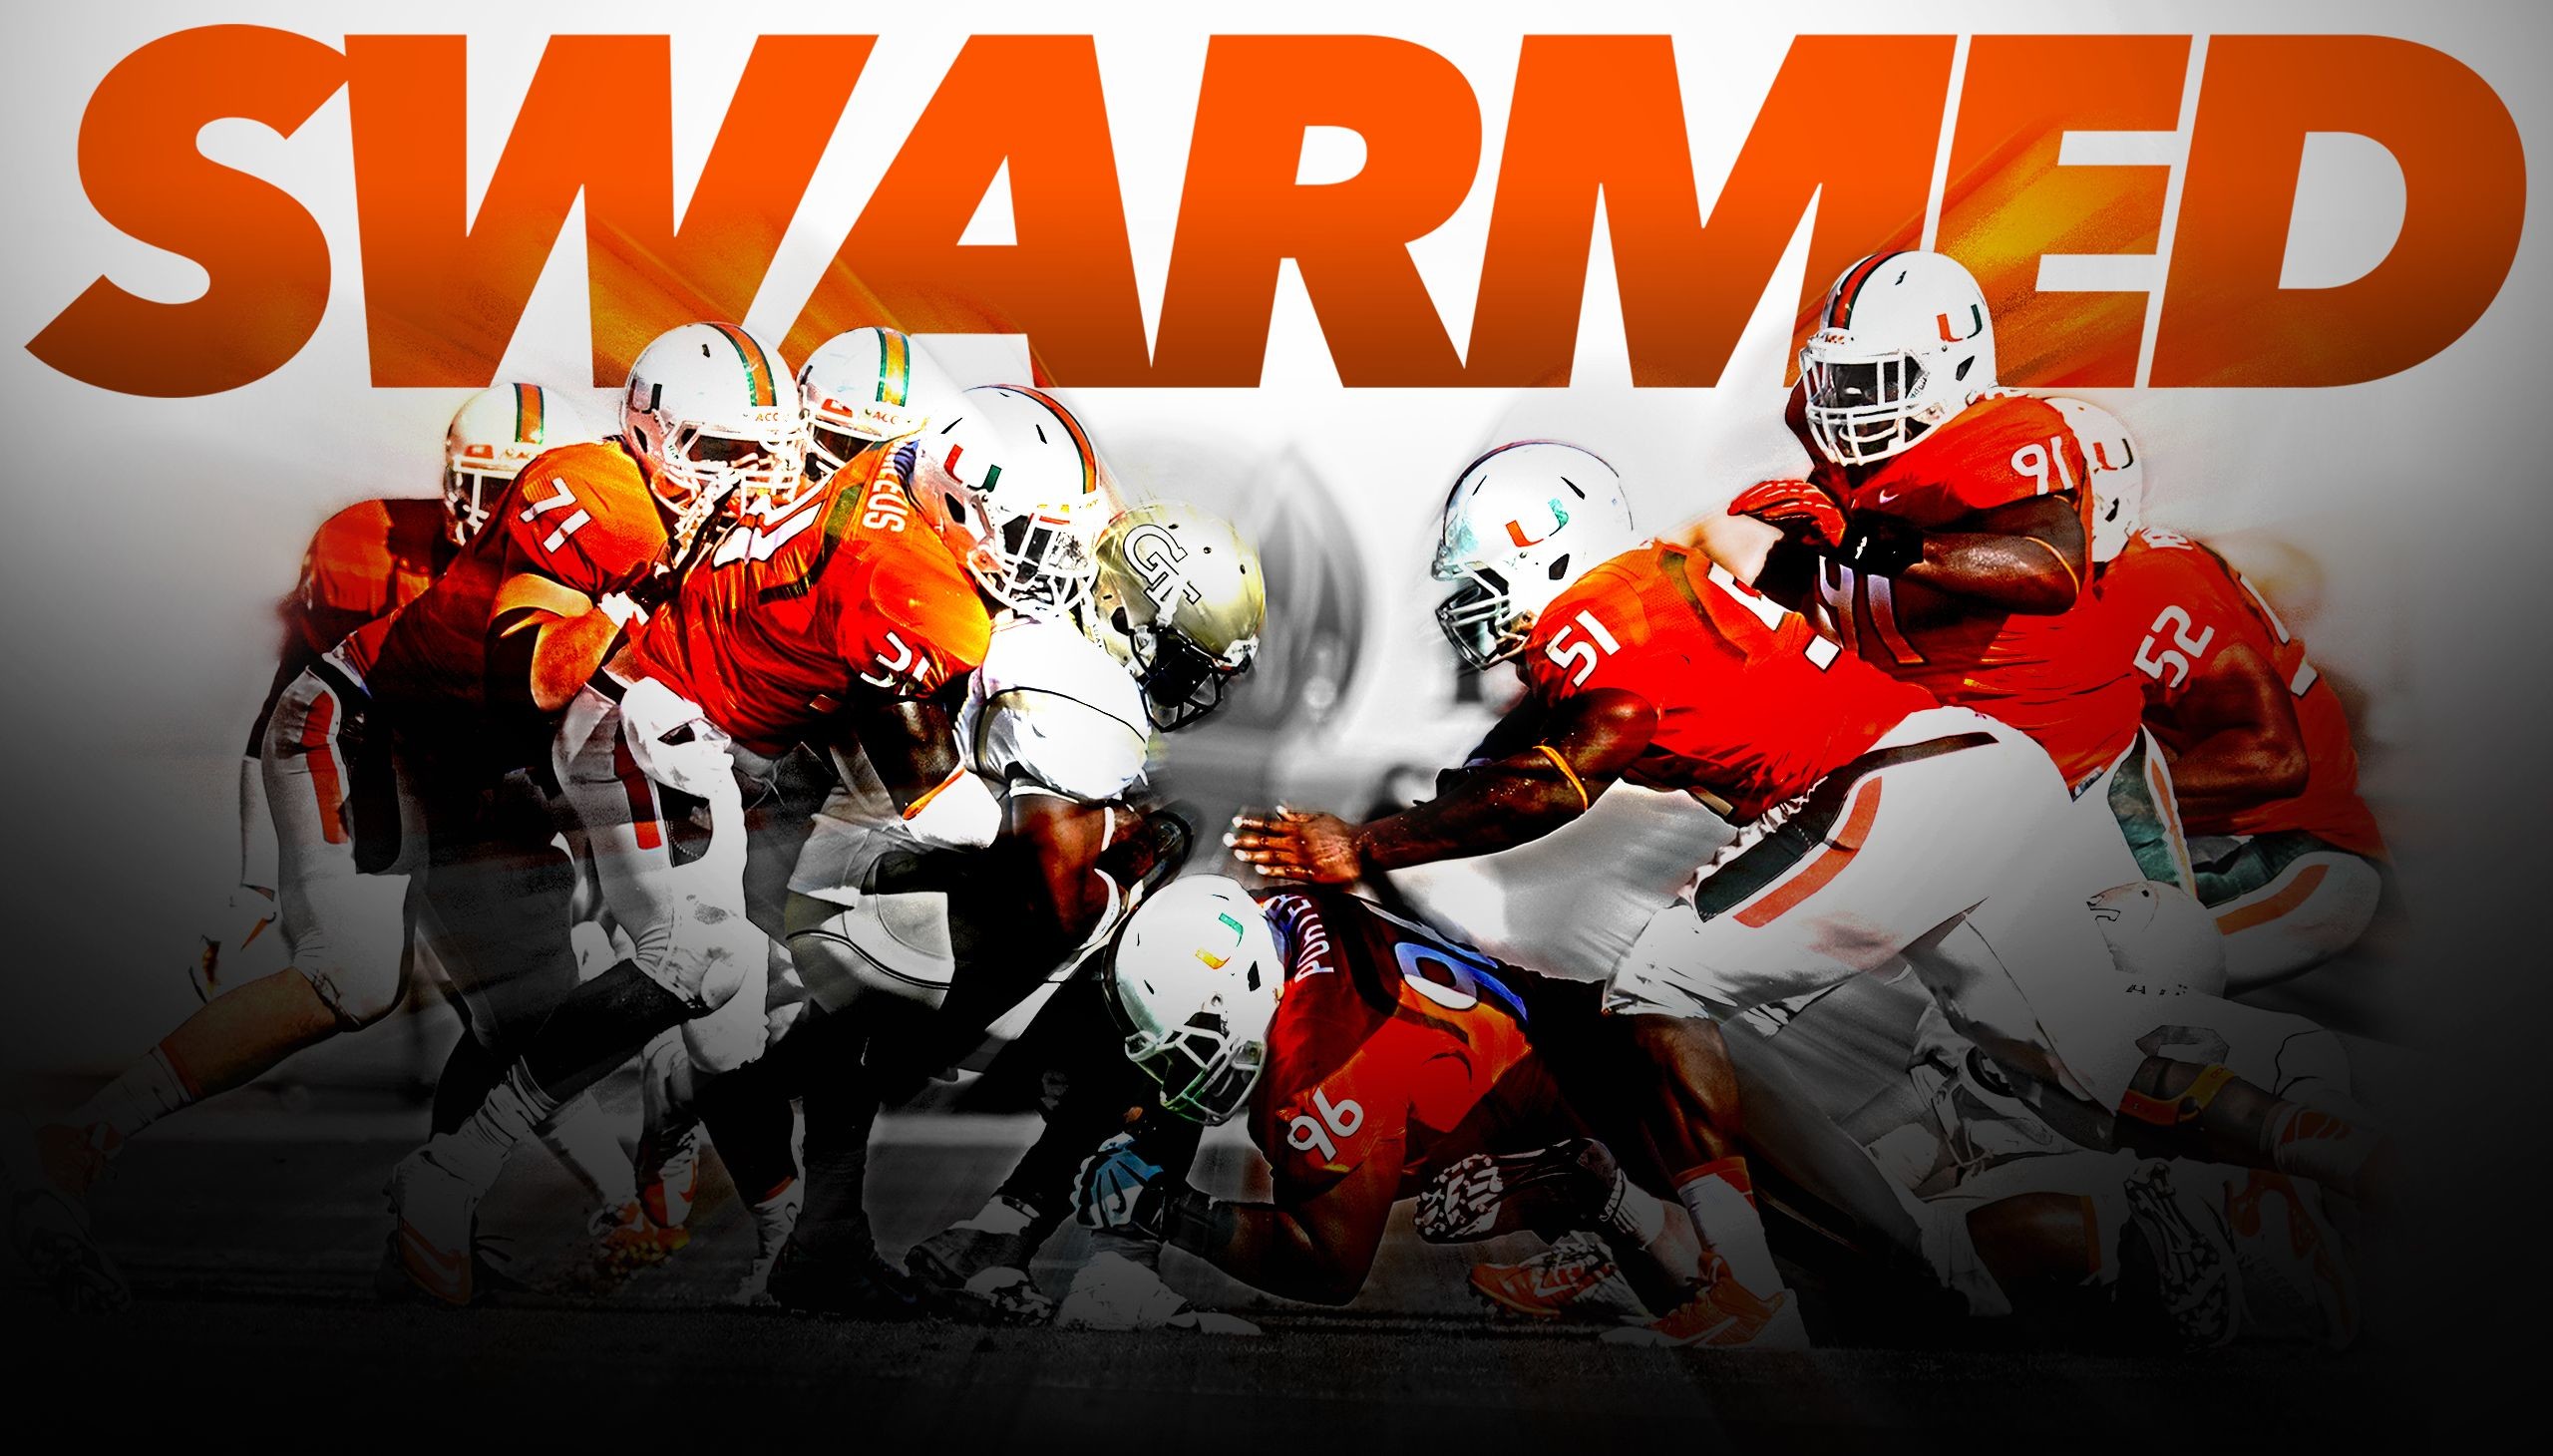 Hd Miami Hurricanes Backgrounds Wallpapercraft - Miami Hurricanes Football Backgrounds , HD Wallpaper & Backgrounds